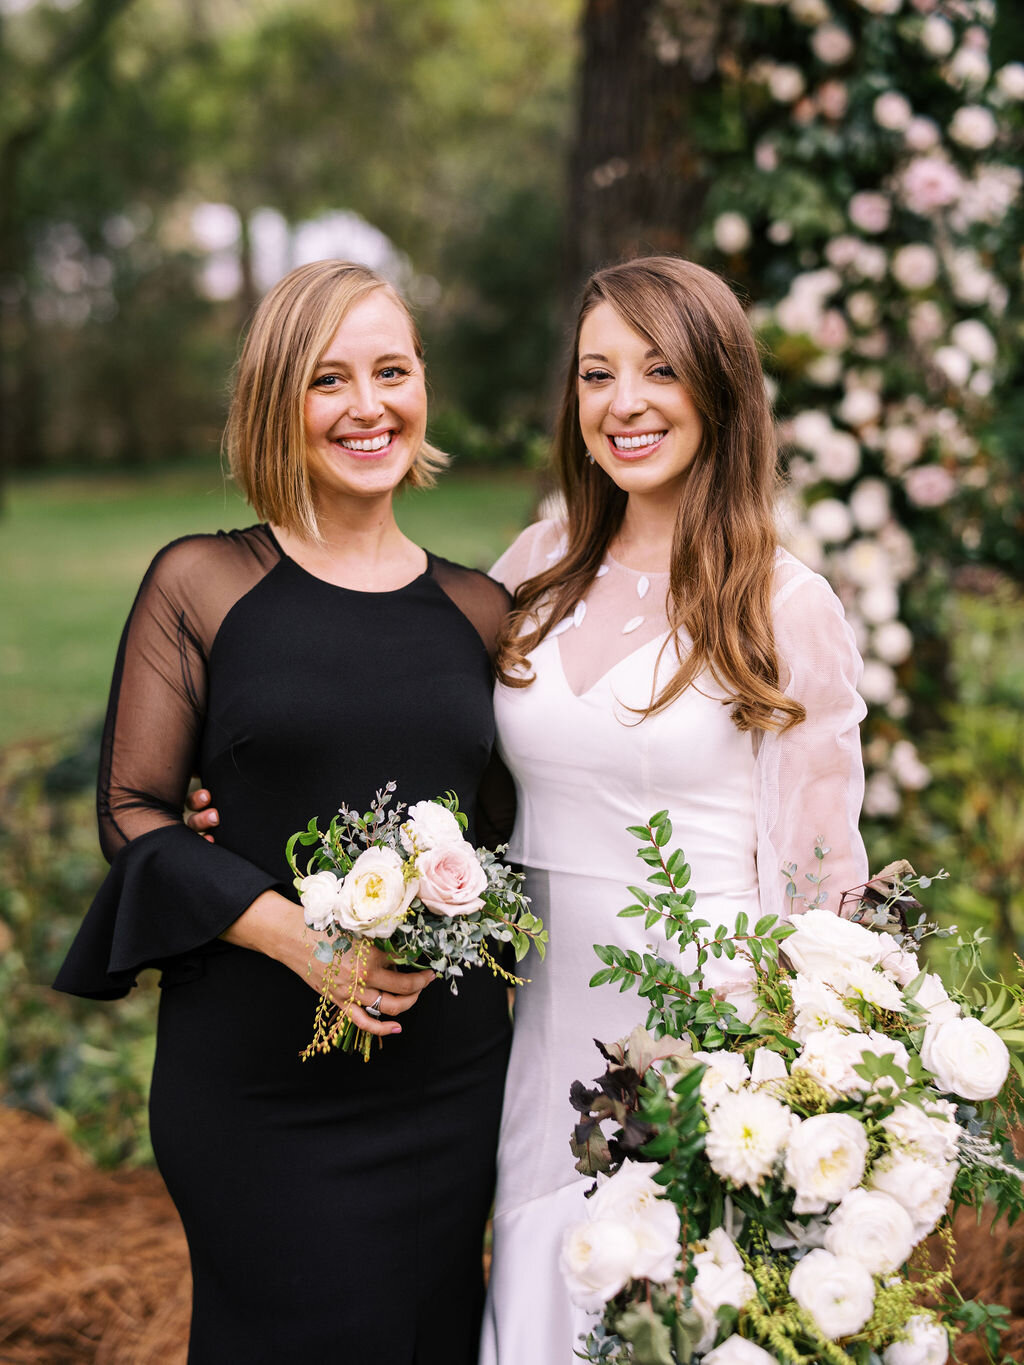 Elegant bridal party in all black with white florals and organic greenery. Belle Meade garden wedding with Nashville florist, Rosemary & Finch.